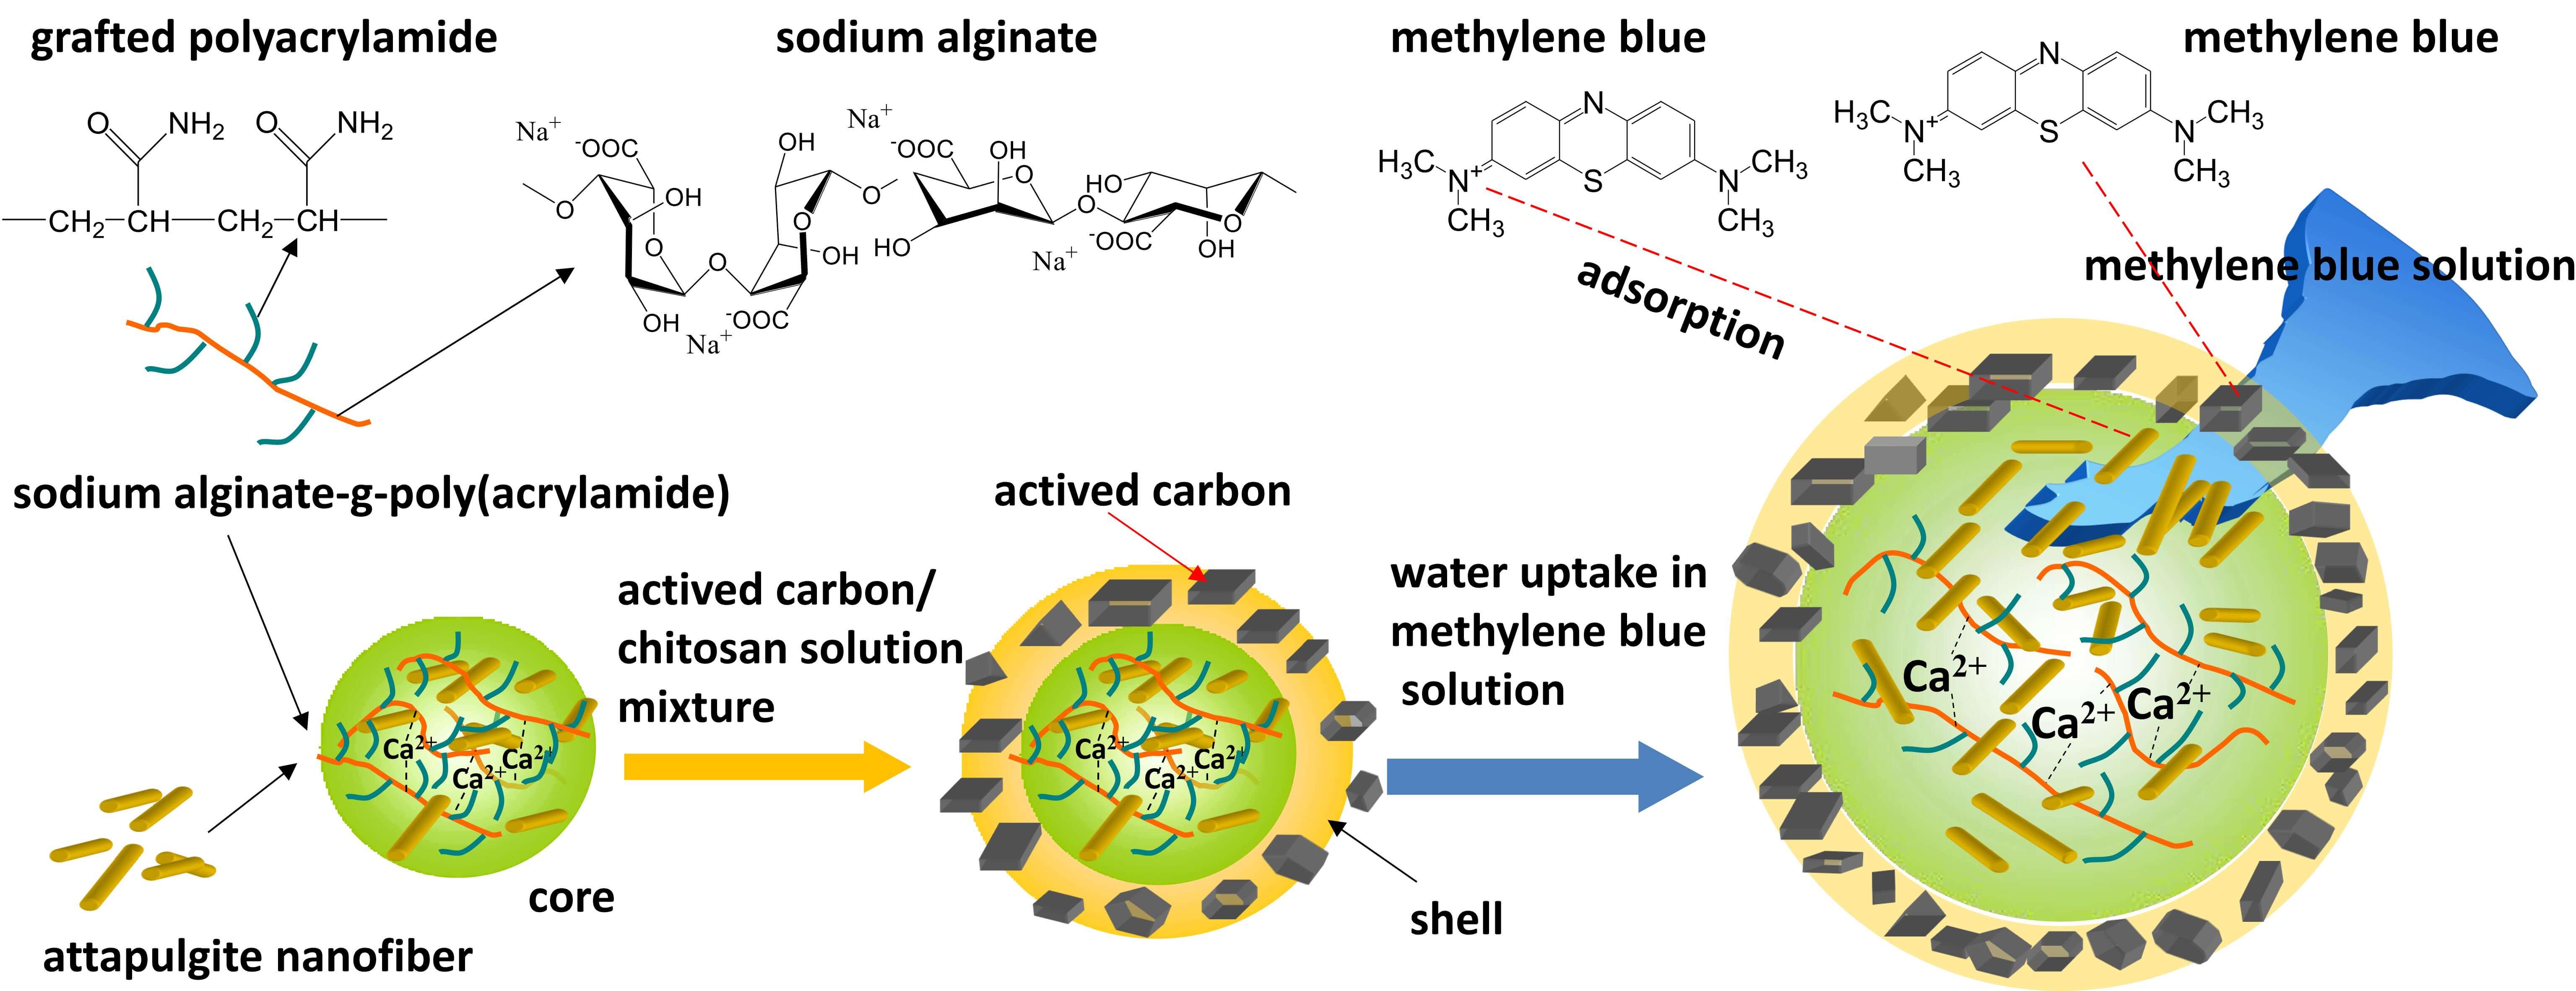 Fabrication of Core-Shell Hydrogel Bead Based on Sodium Alginate and Chitosan for Methylene Blue Adsorption